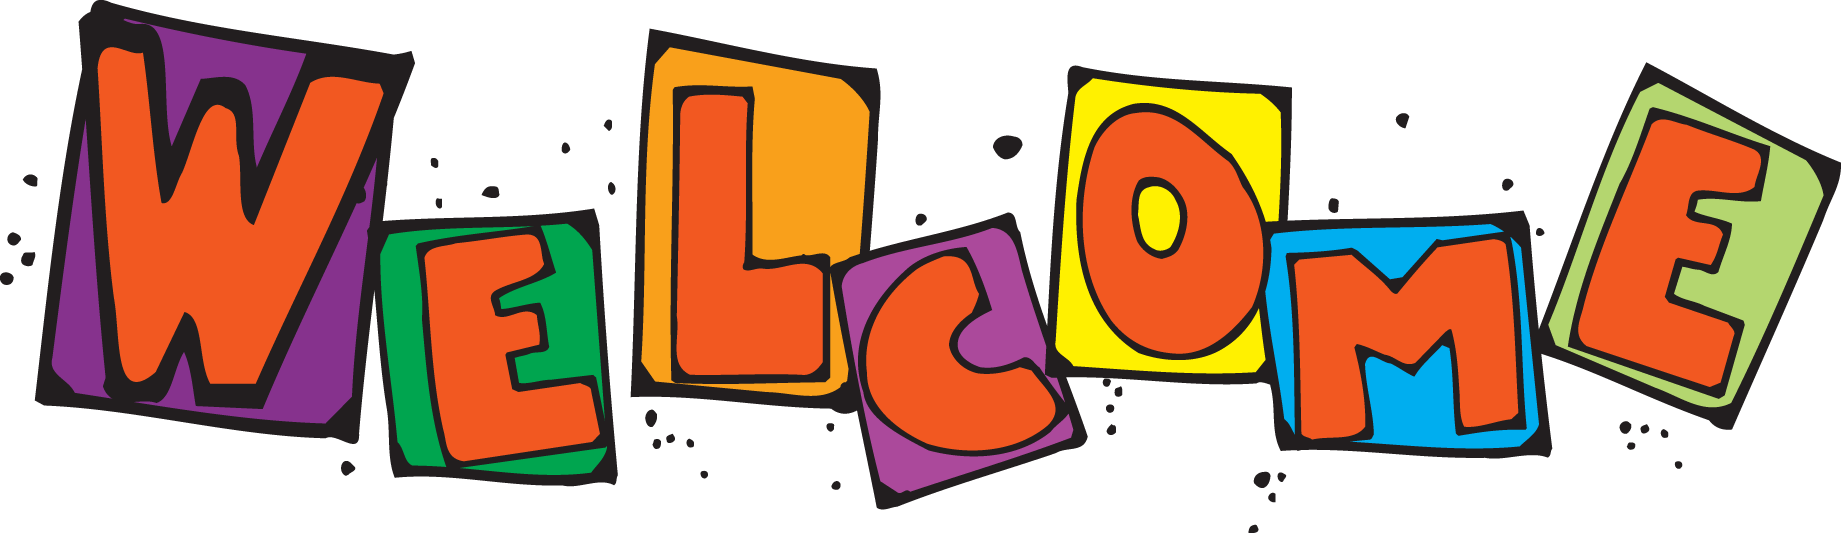 Welcome clipart free clipart 